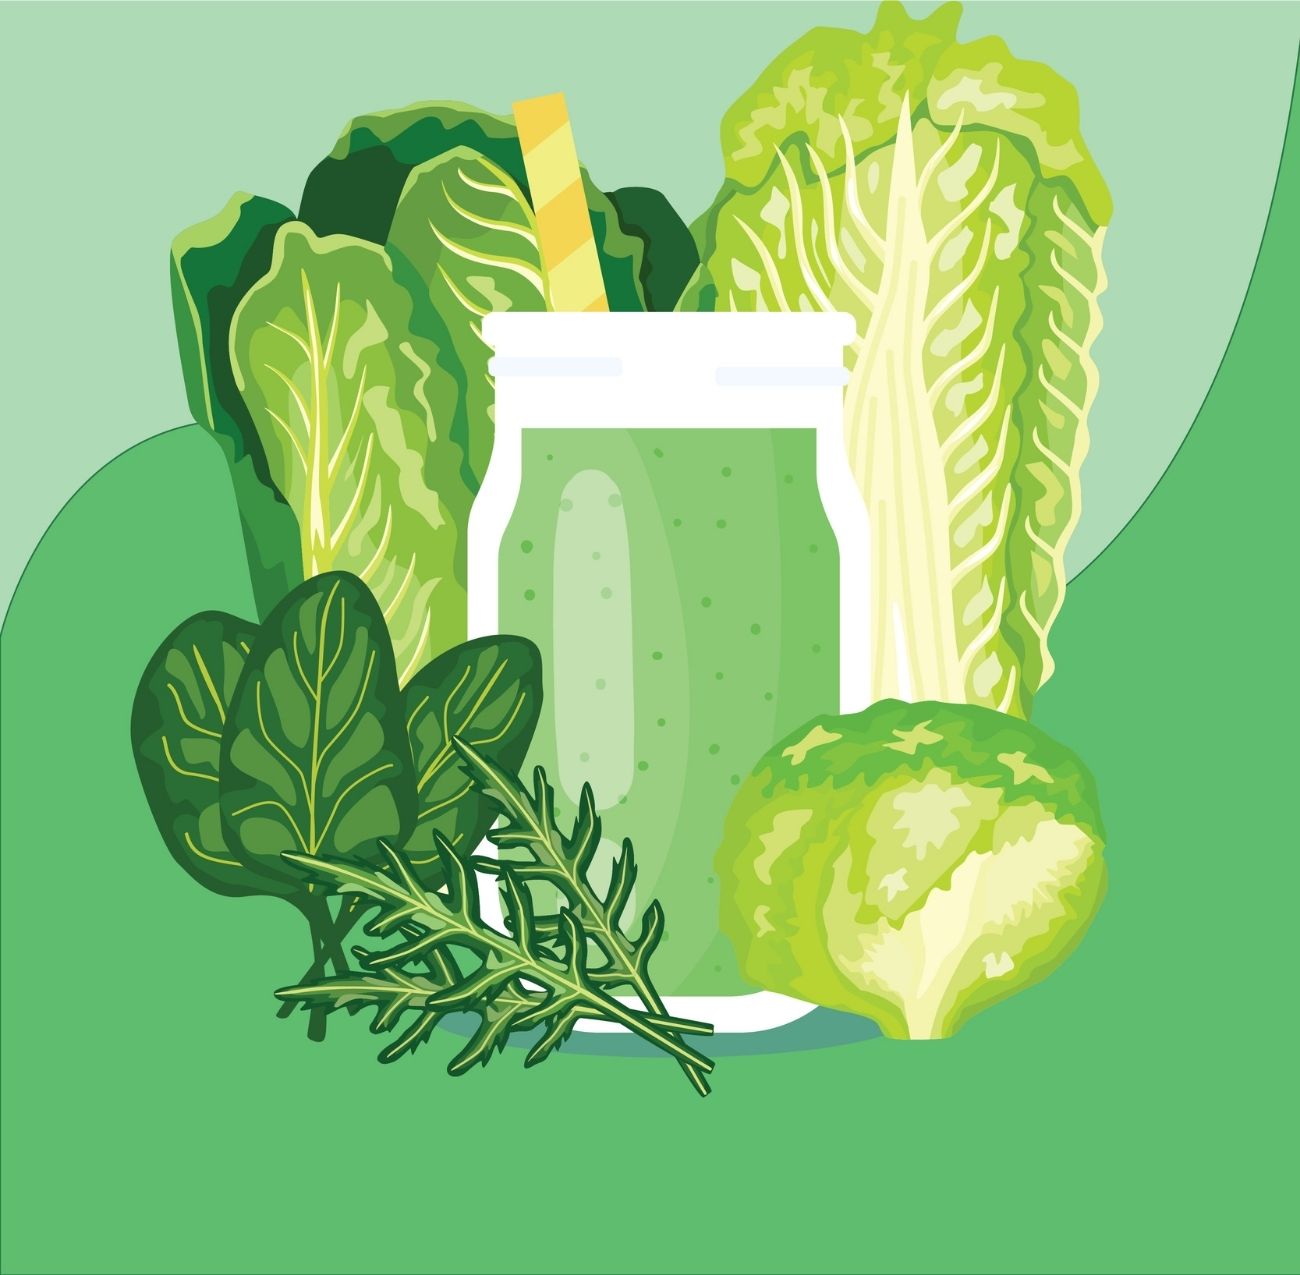 Romaine lettuce spinach cabbage bok choy fennel